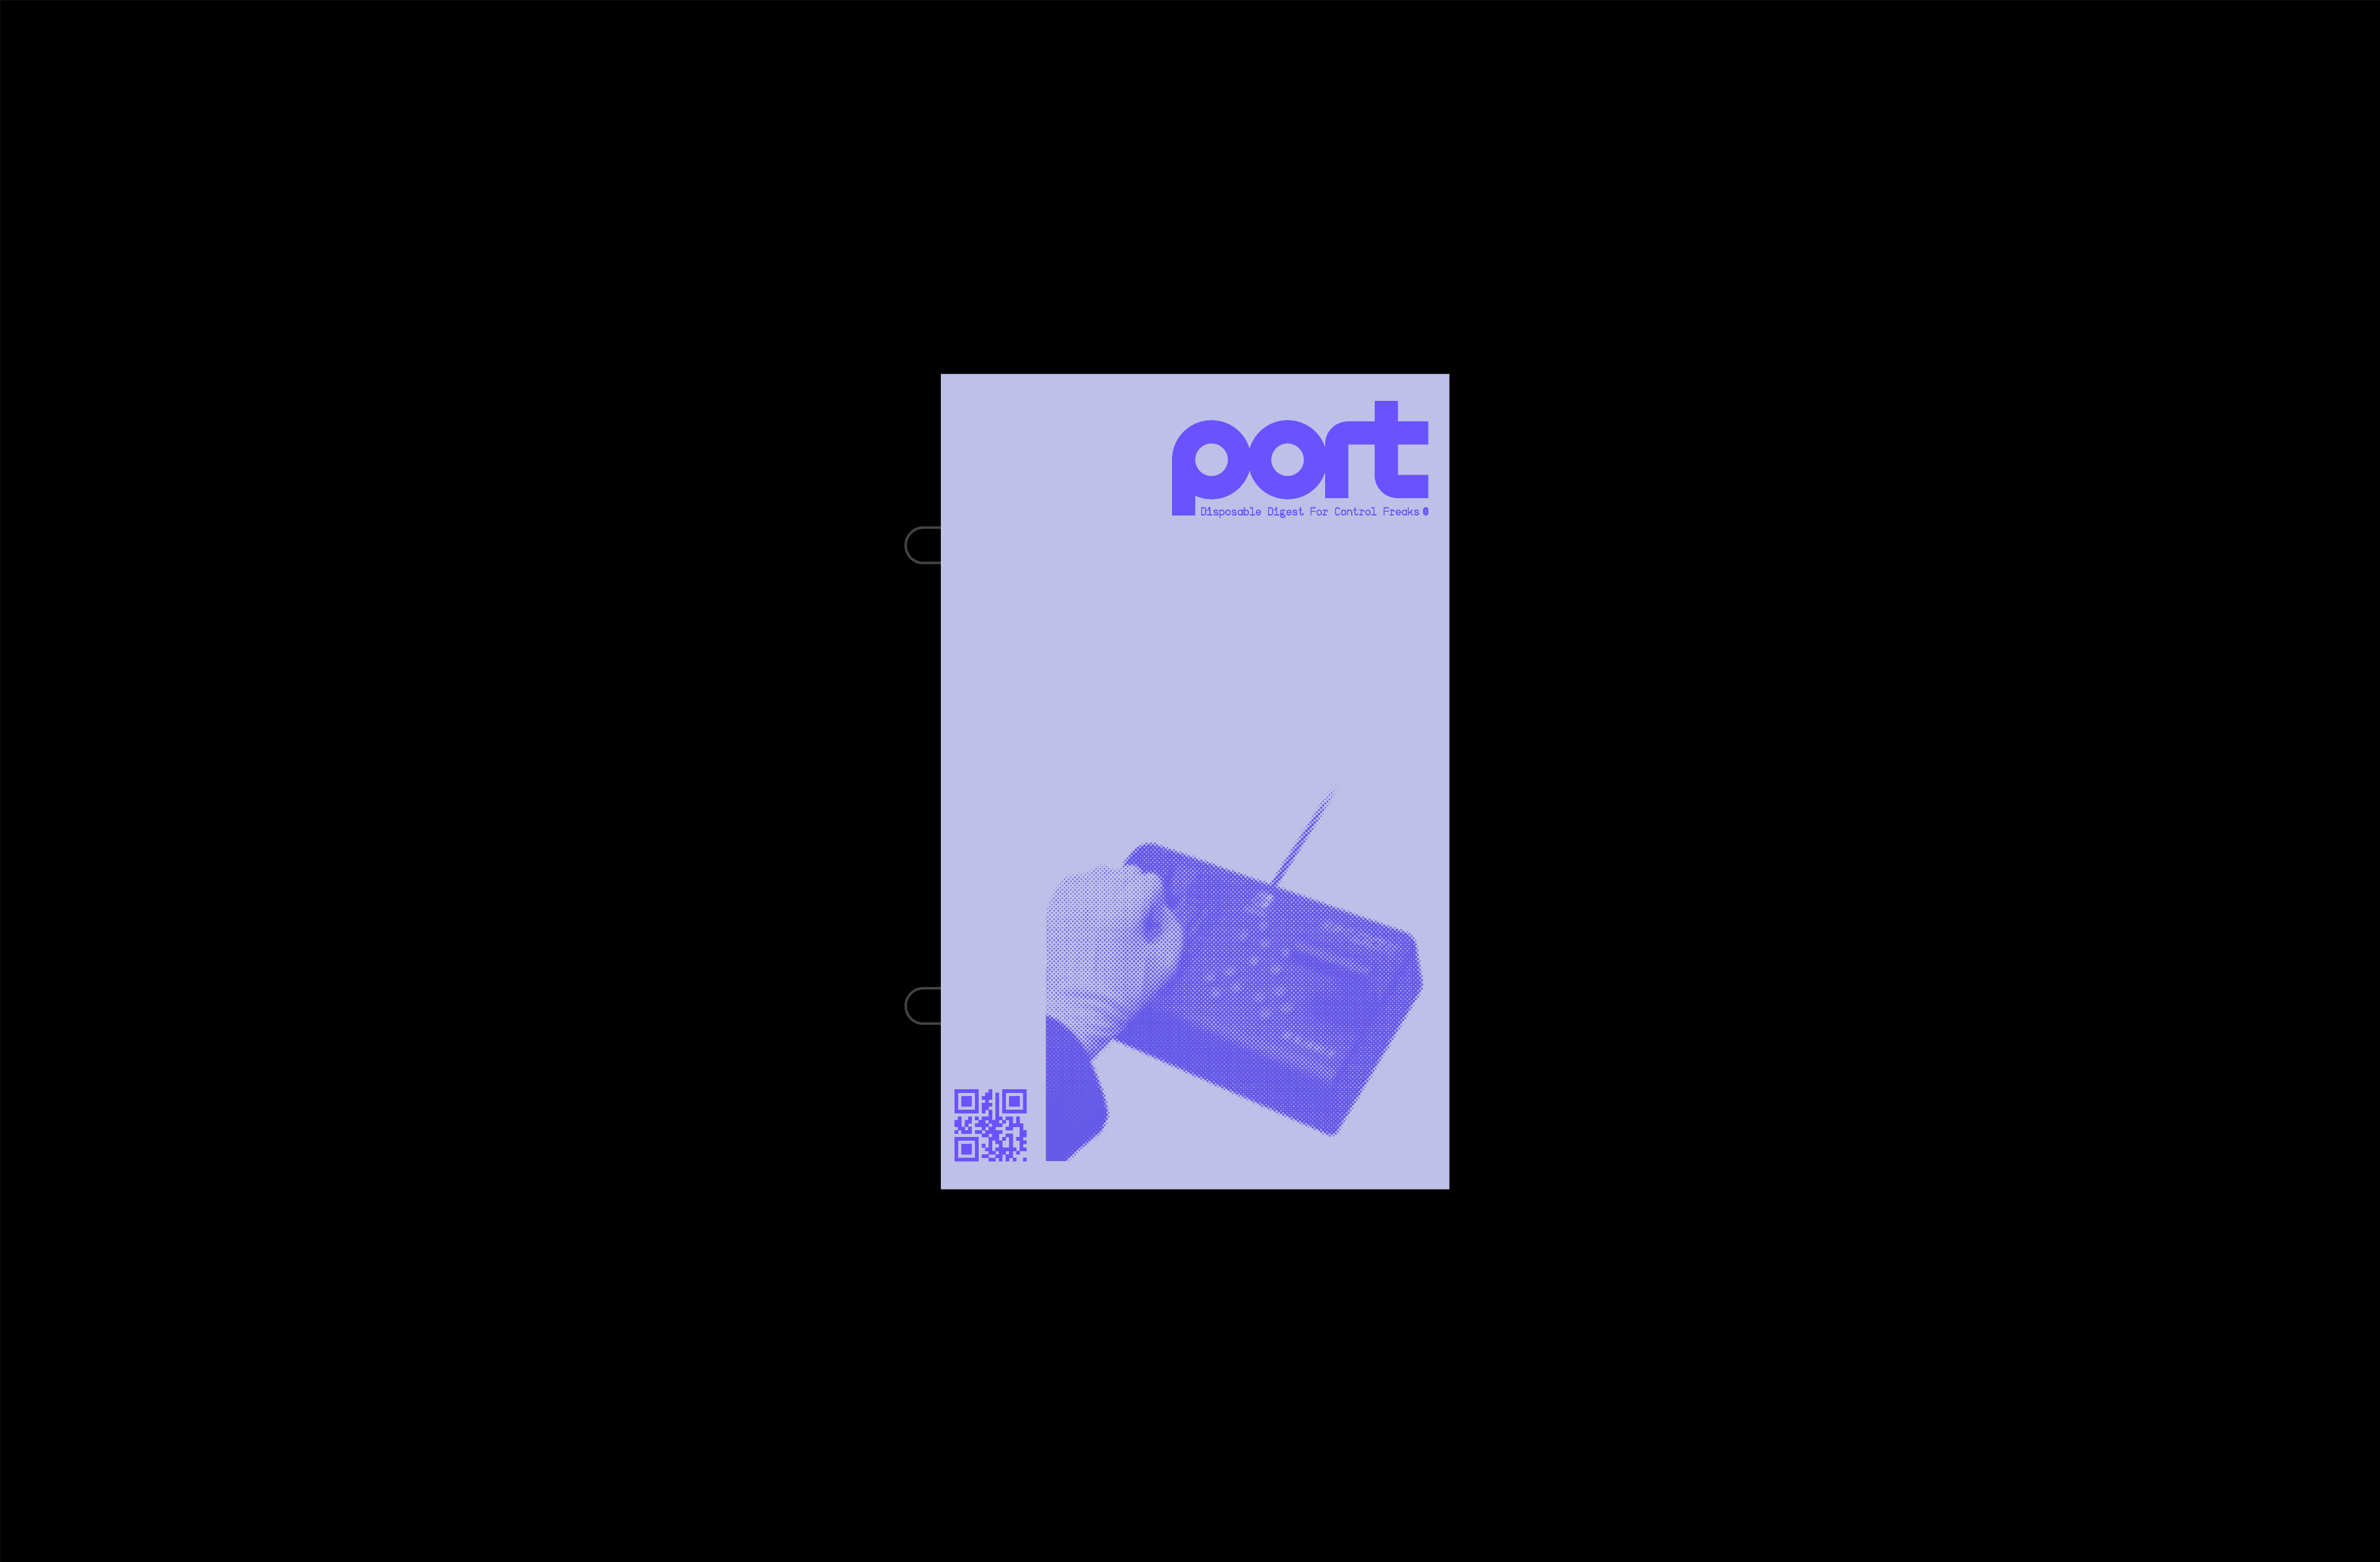 Port — Disposable Digest For Control Freaks